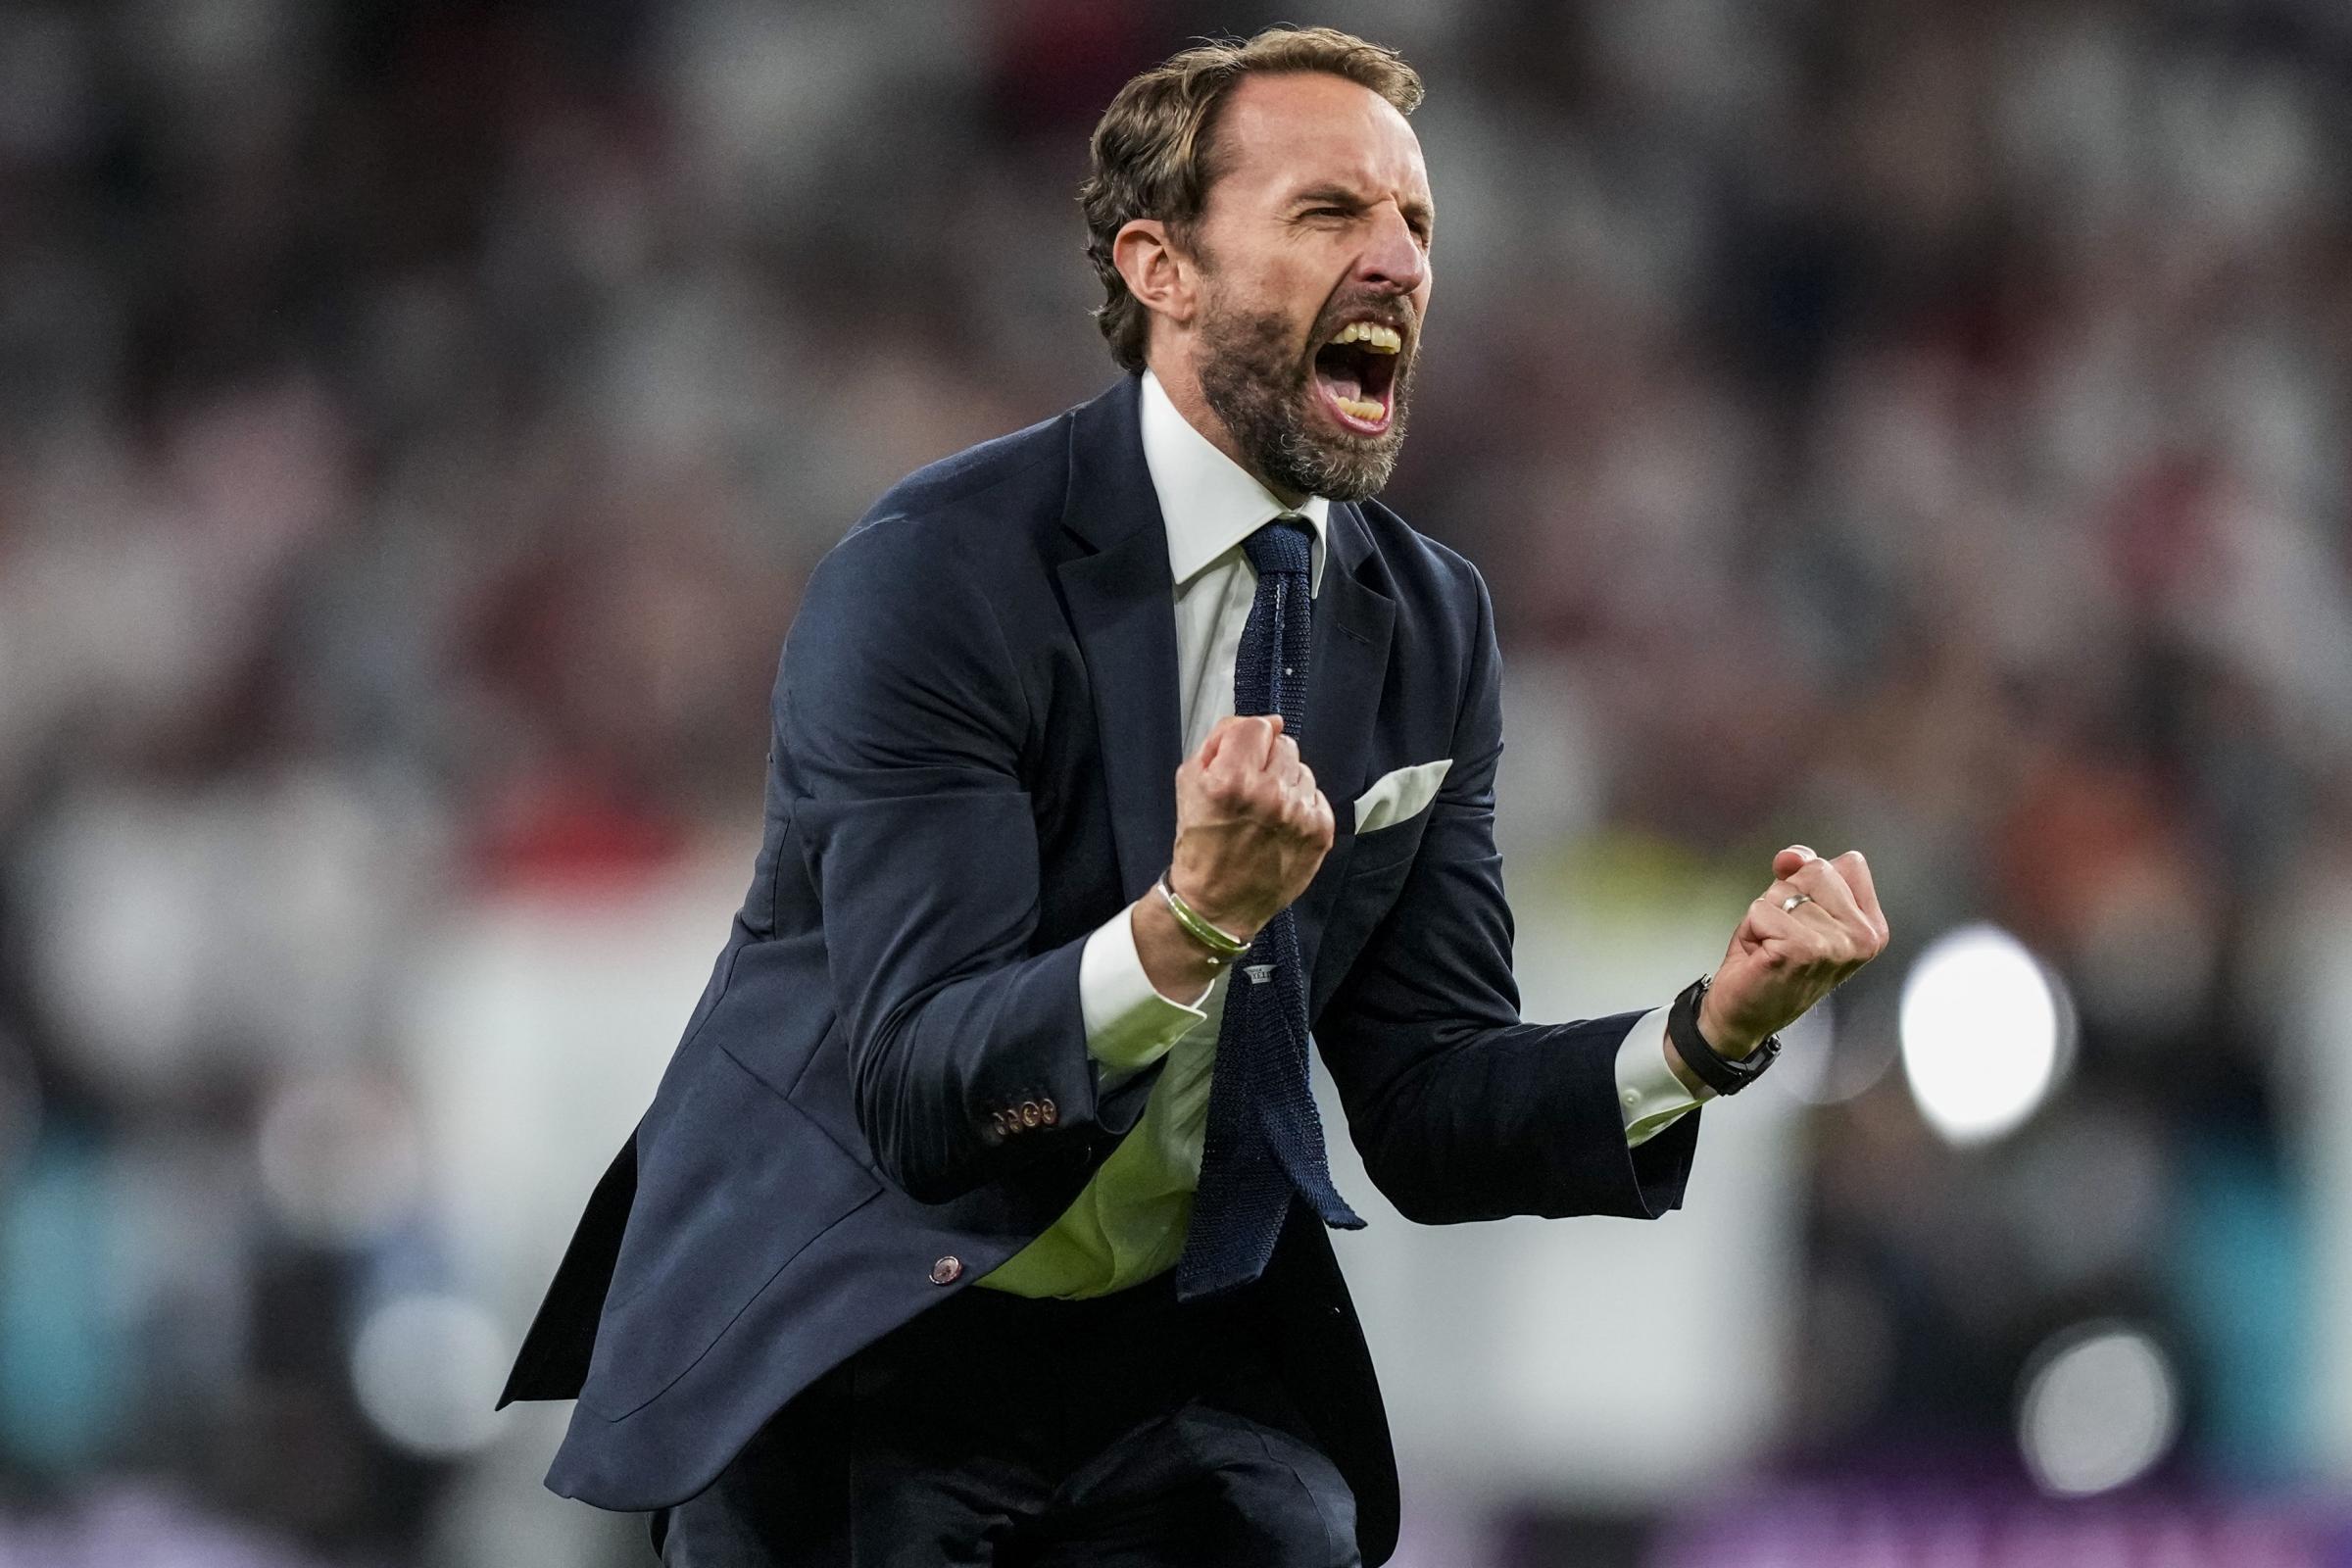 Euro 2020: Gareth Southgate's former PE teacher knew he would excel